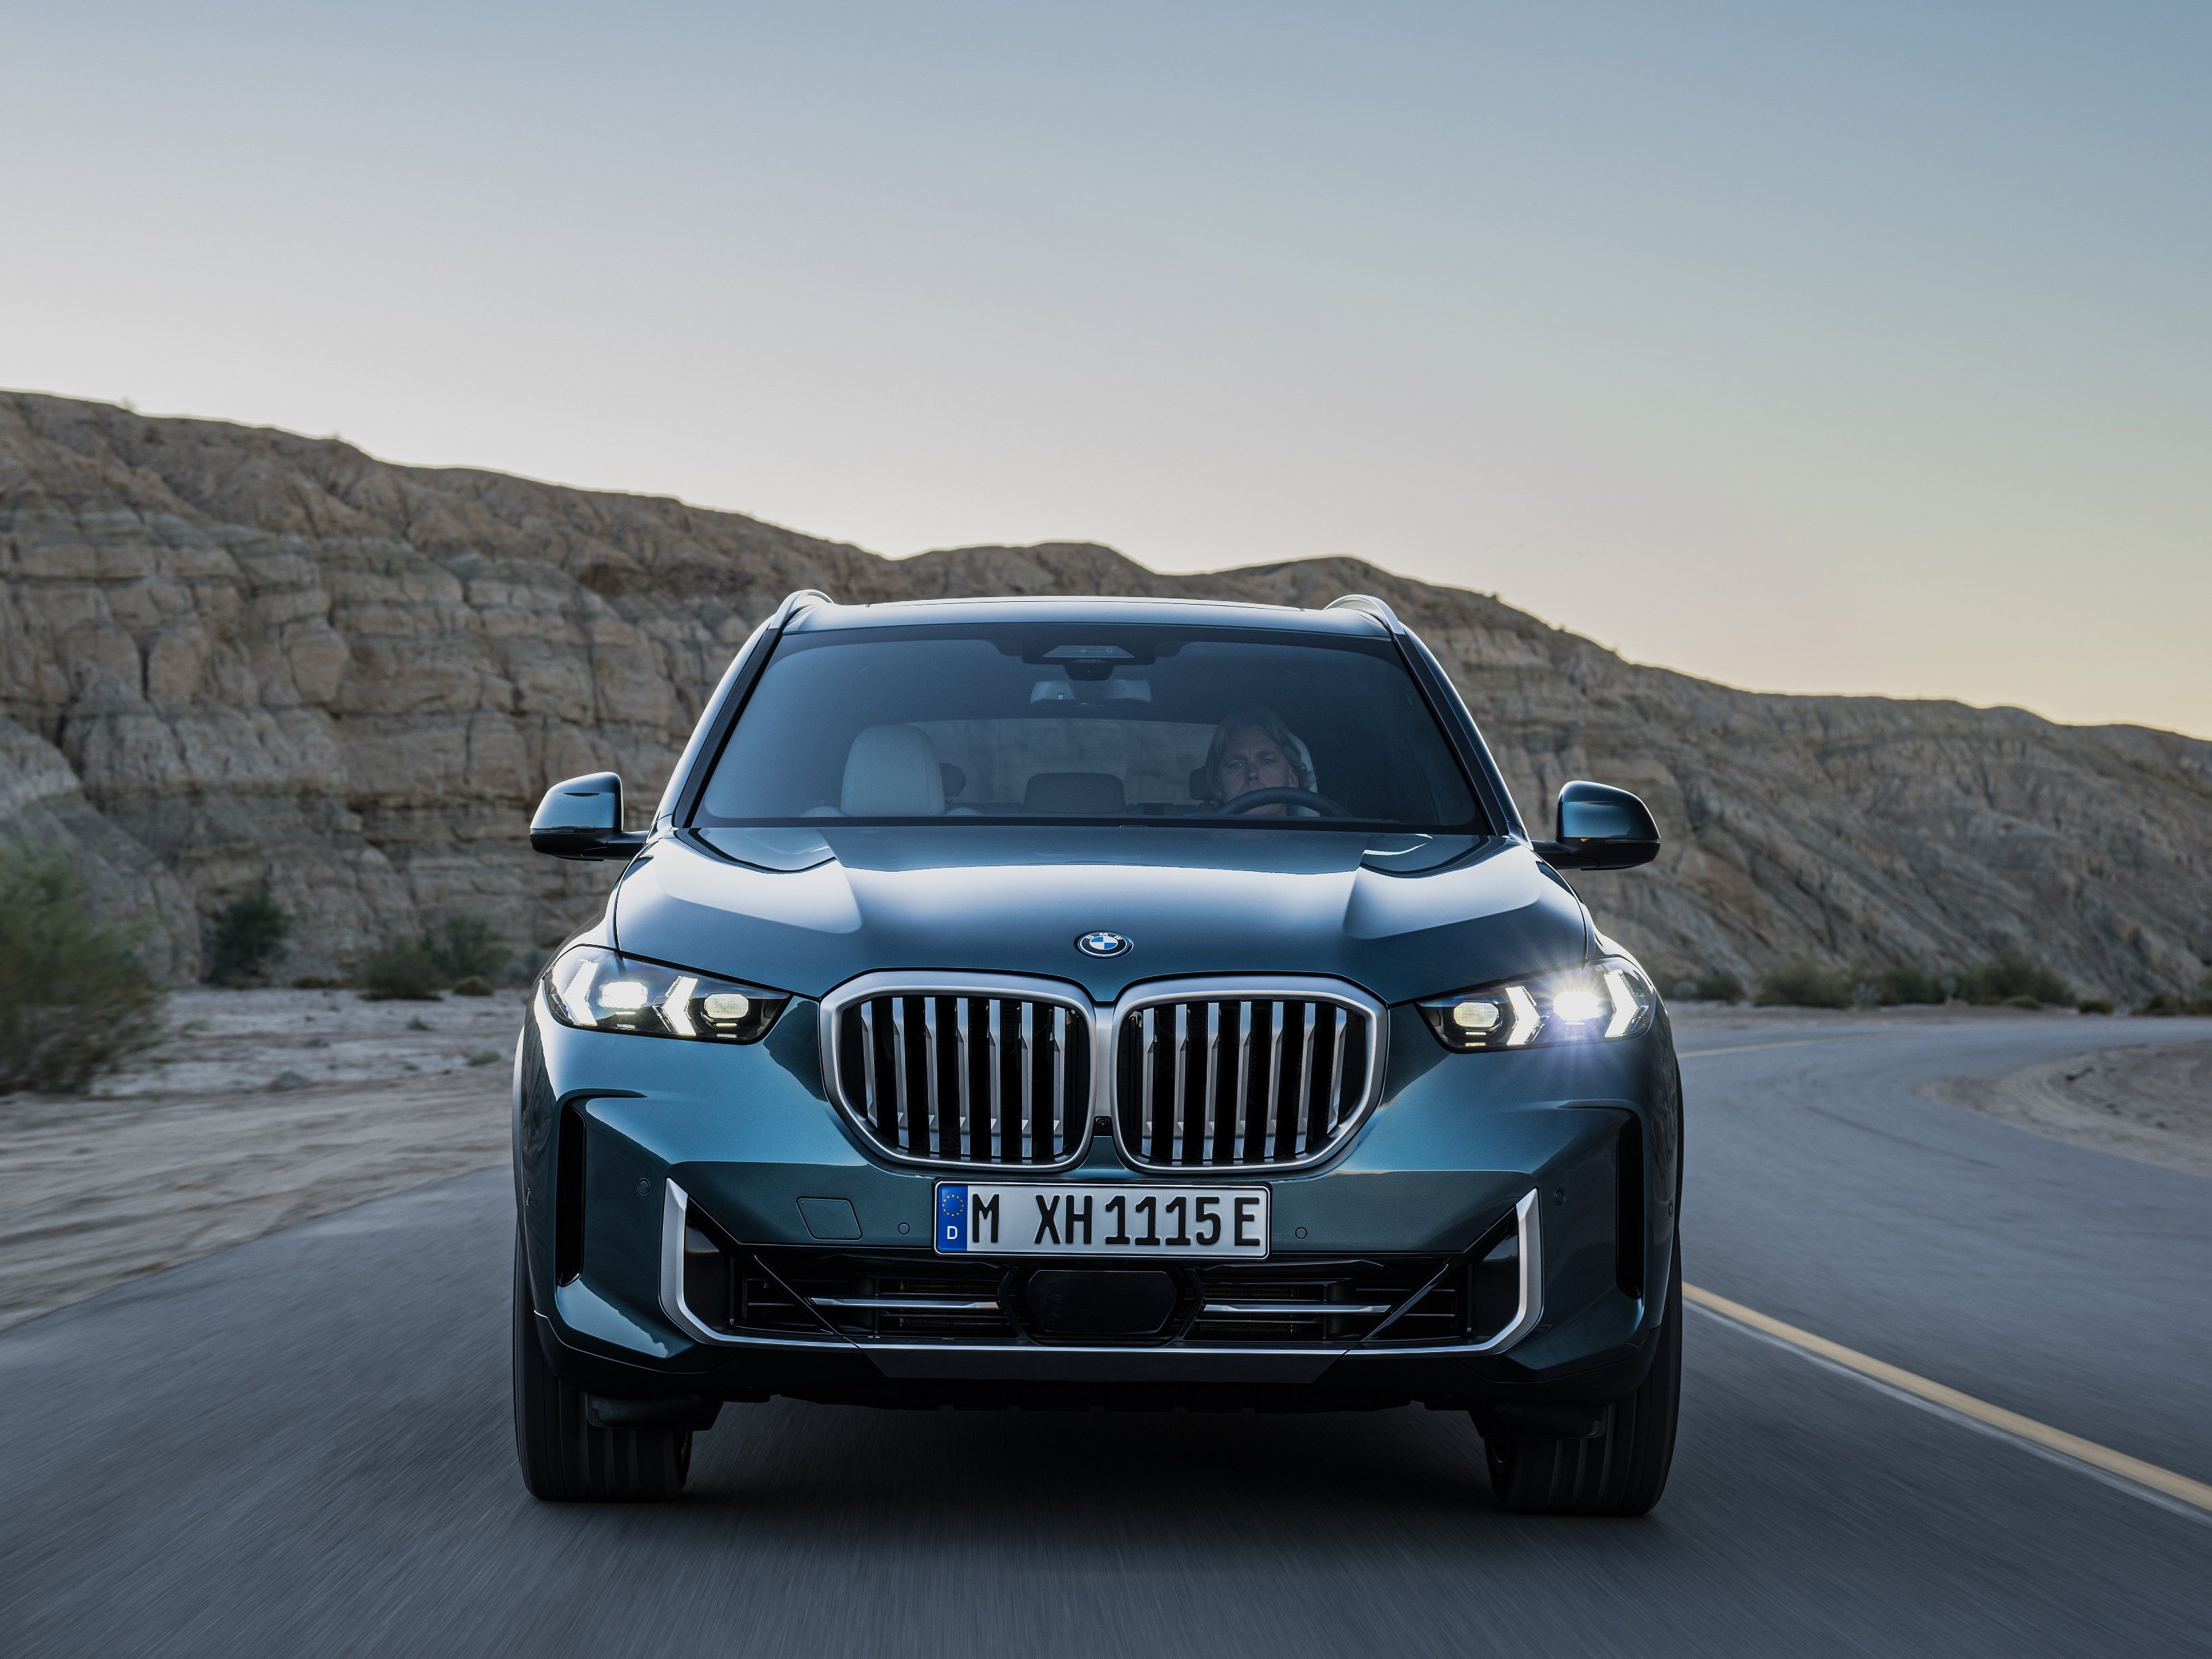 BMW X5 facelift India launch on 14 July: What should you expect